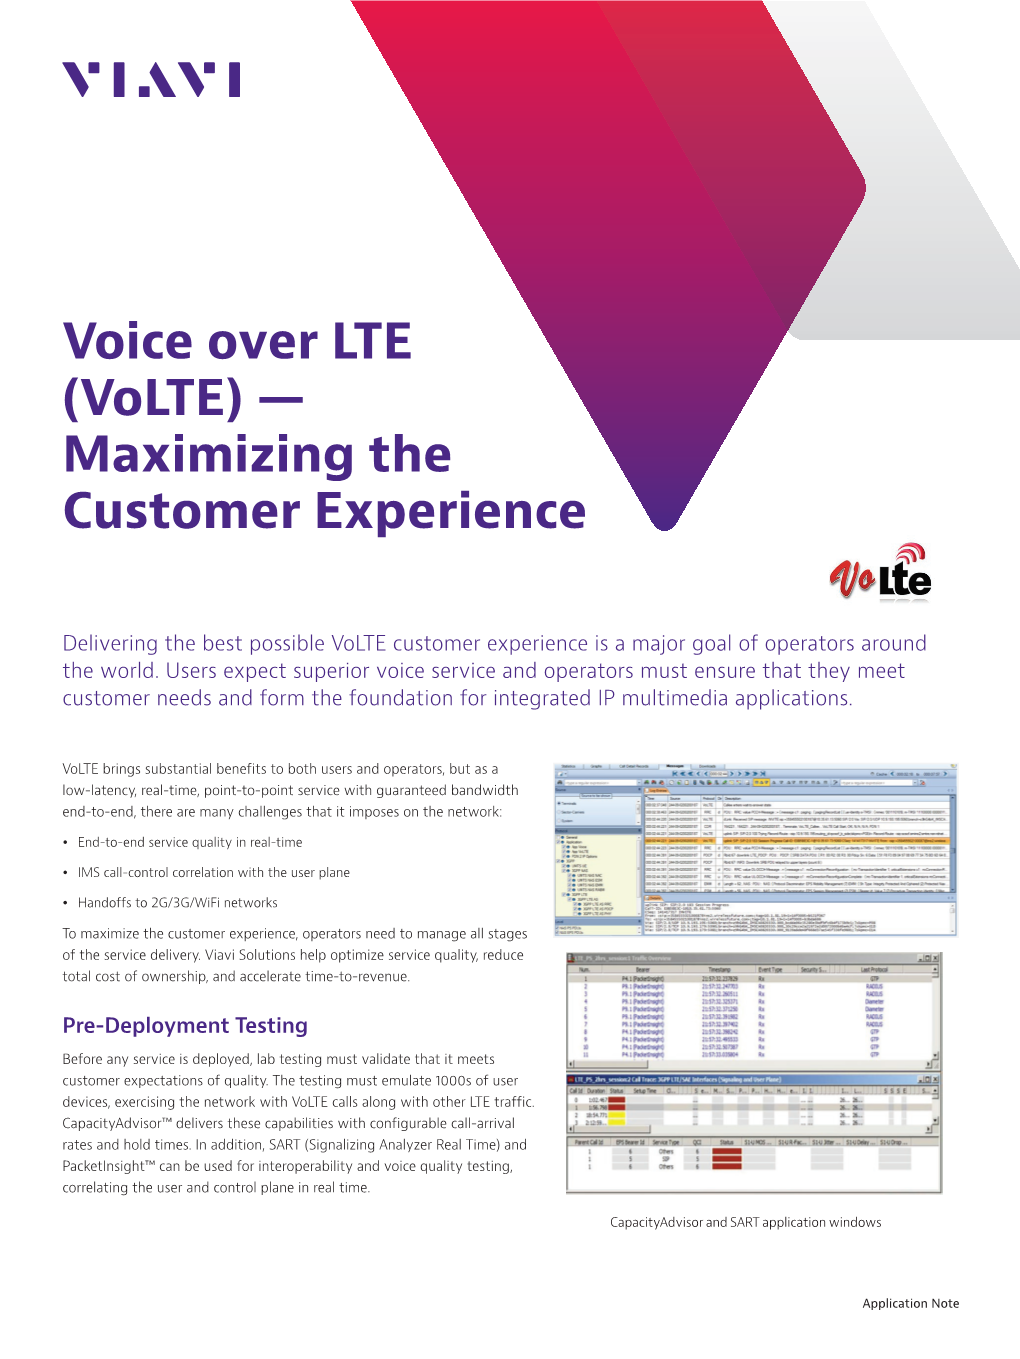 Voice Over LTE (Volte) — Maximizing the Customer Experience